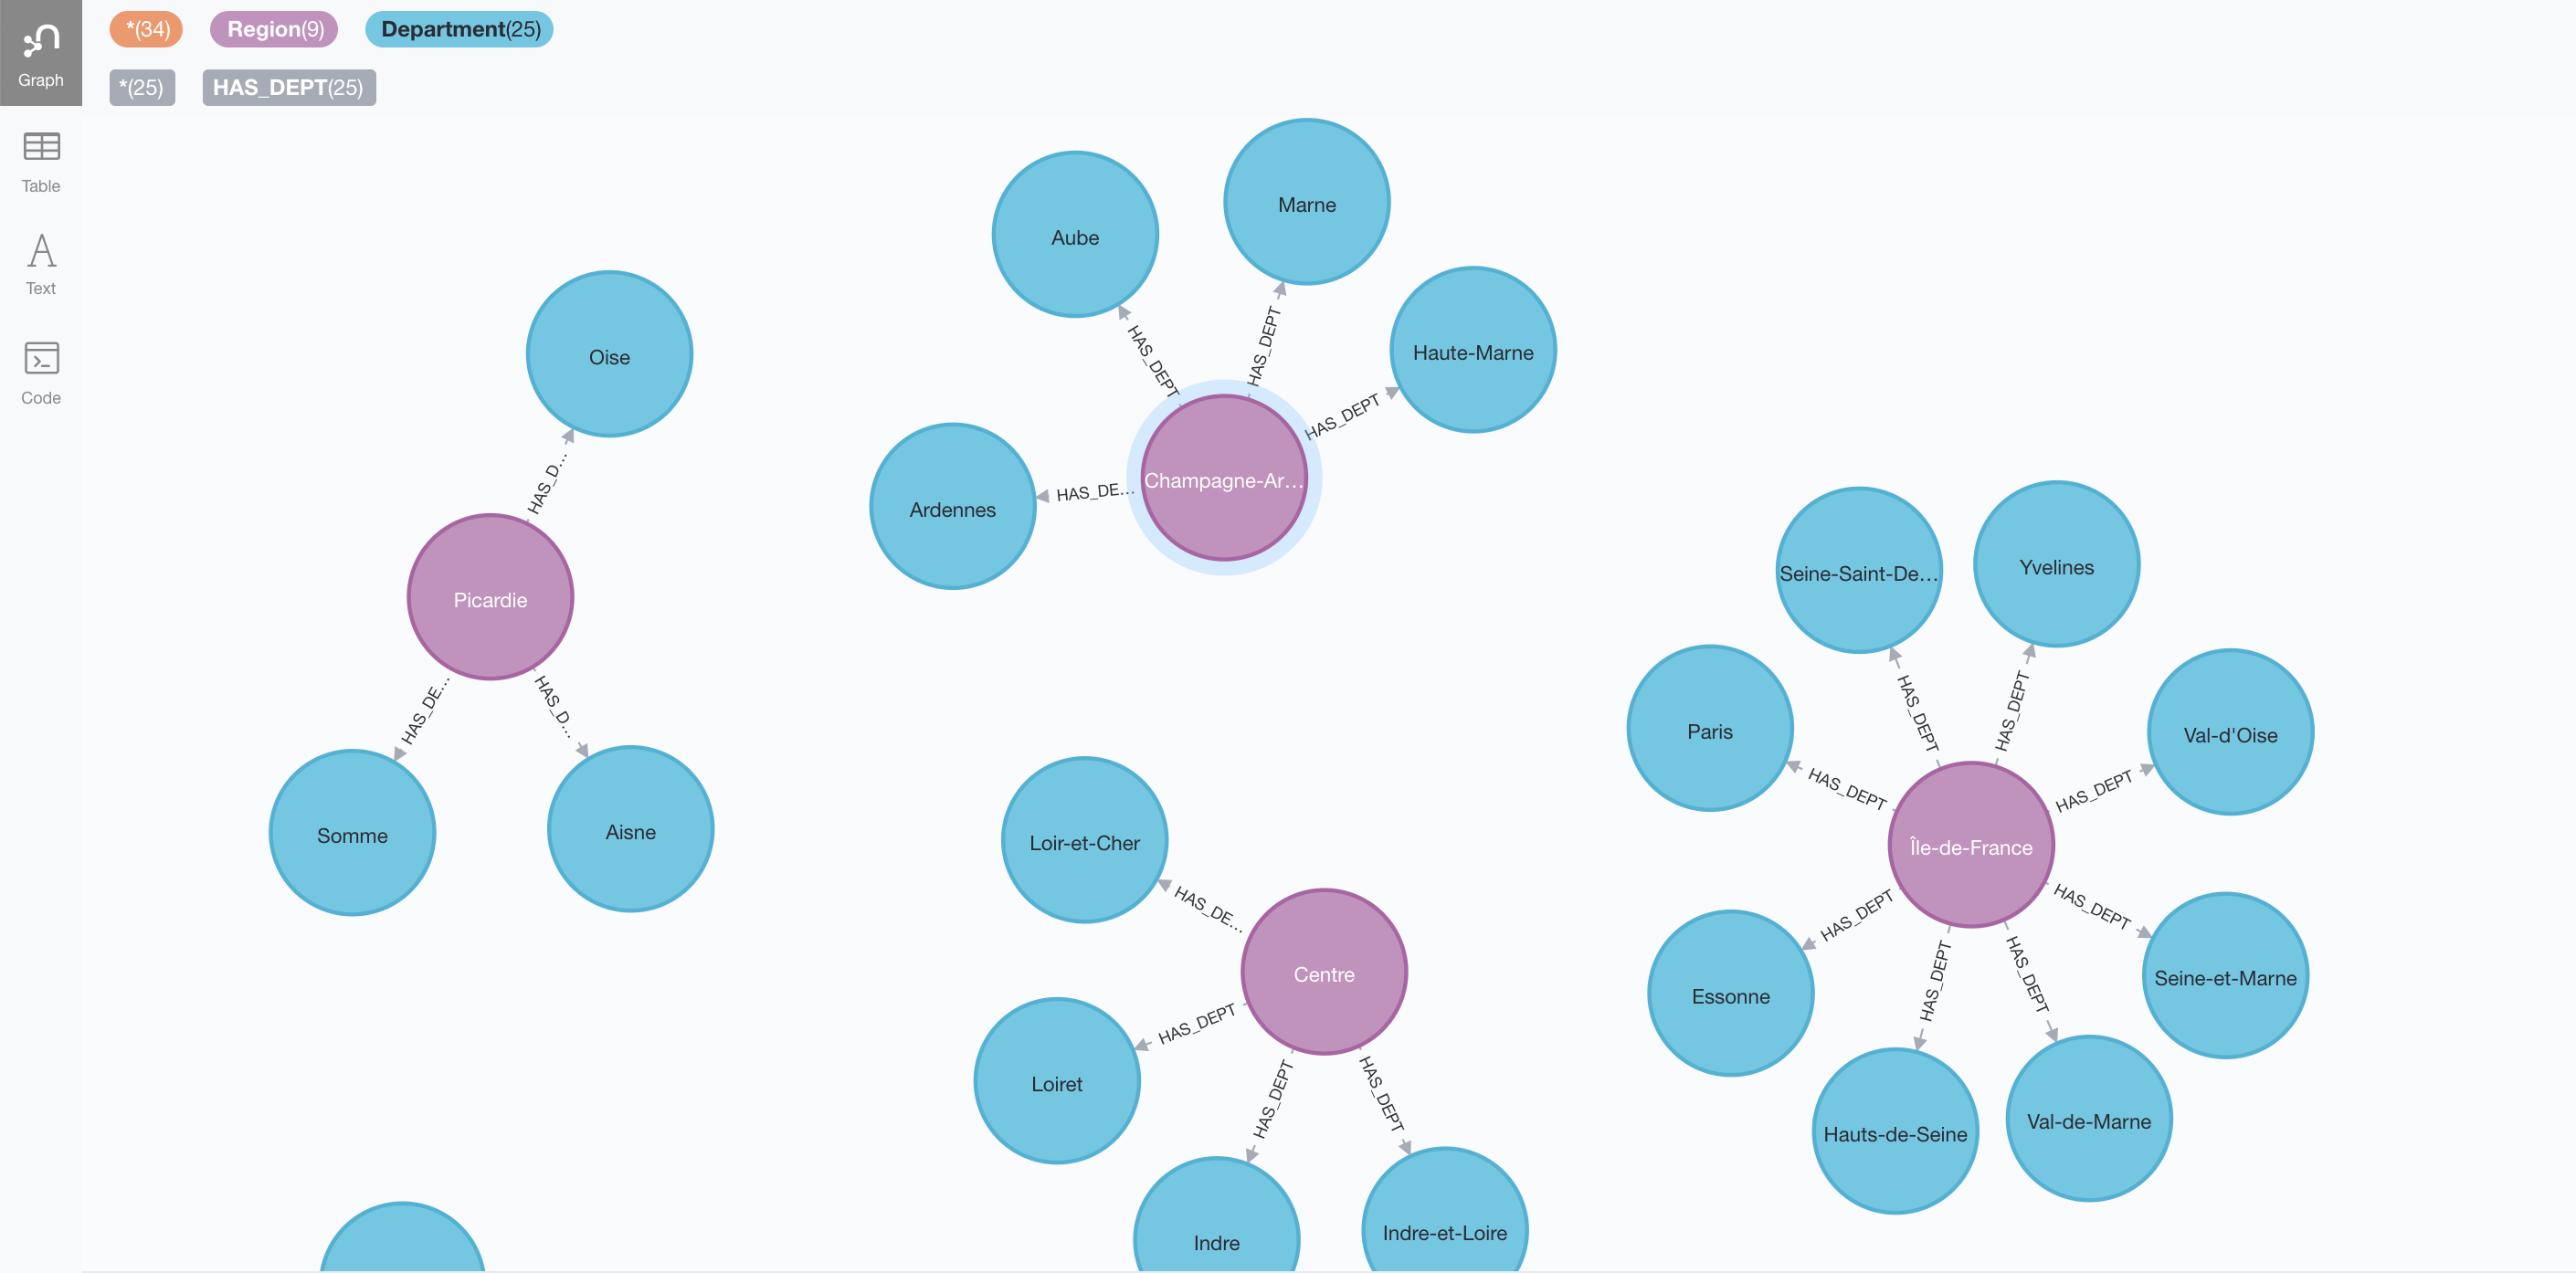 apoc.dv.imported graph from RDB